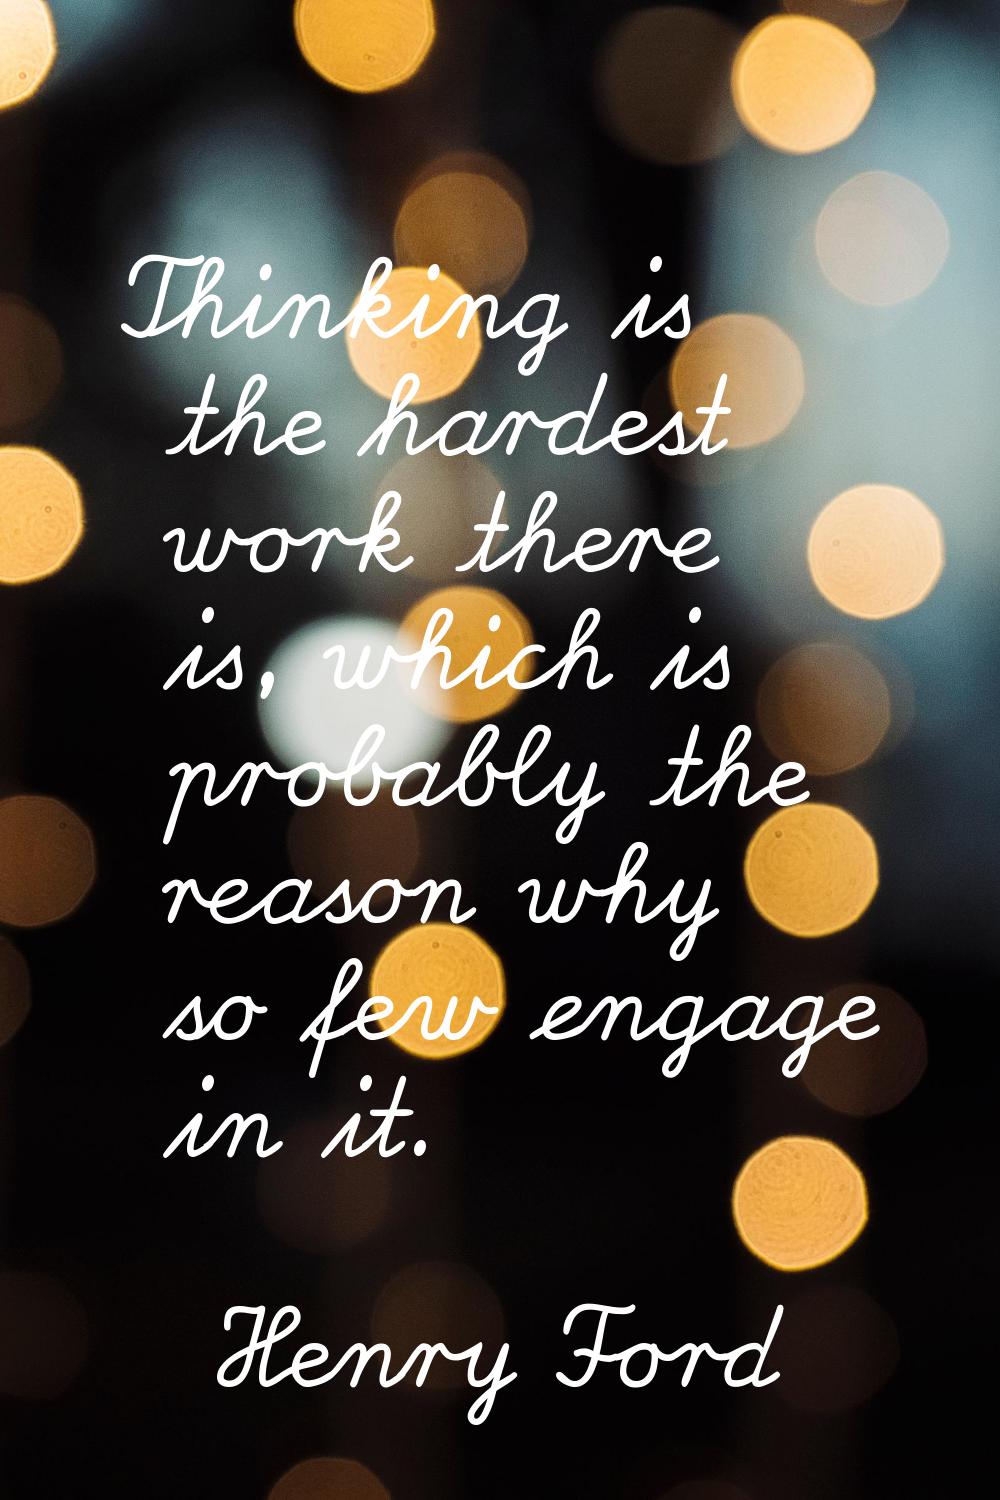 Thinking is the hardest work there is, which is probably the reason why so few engage in it.